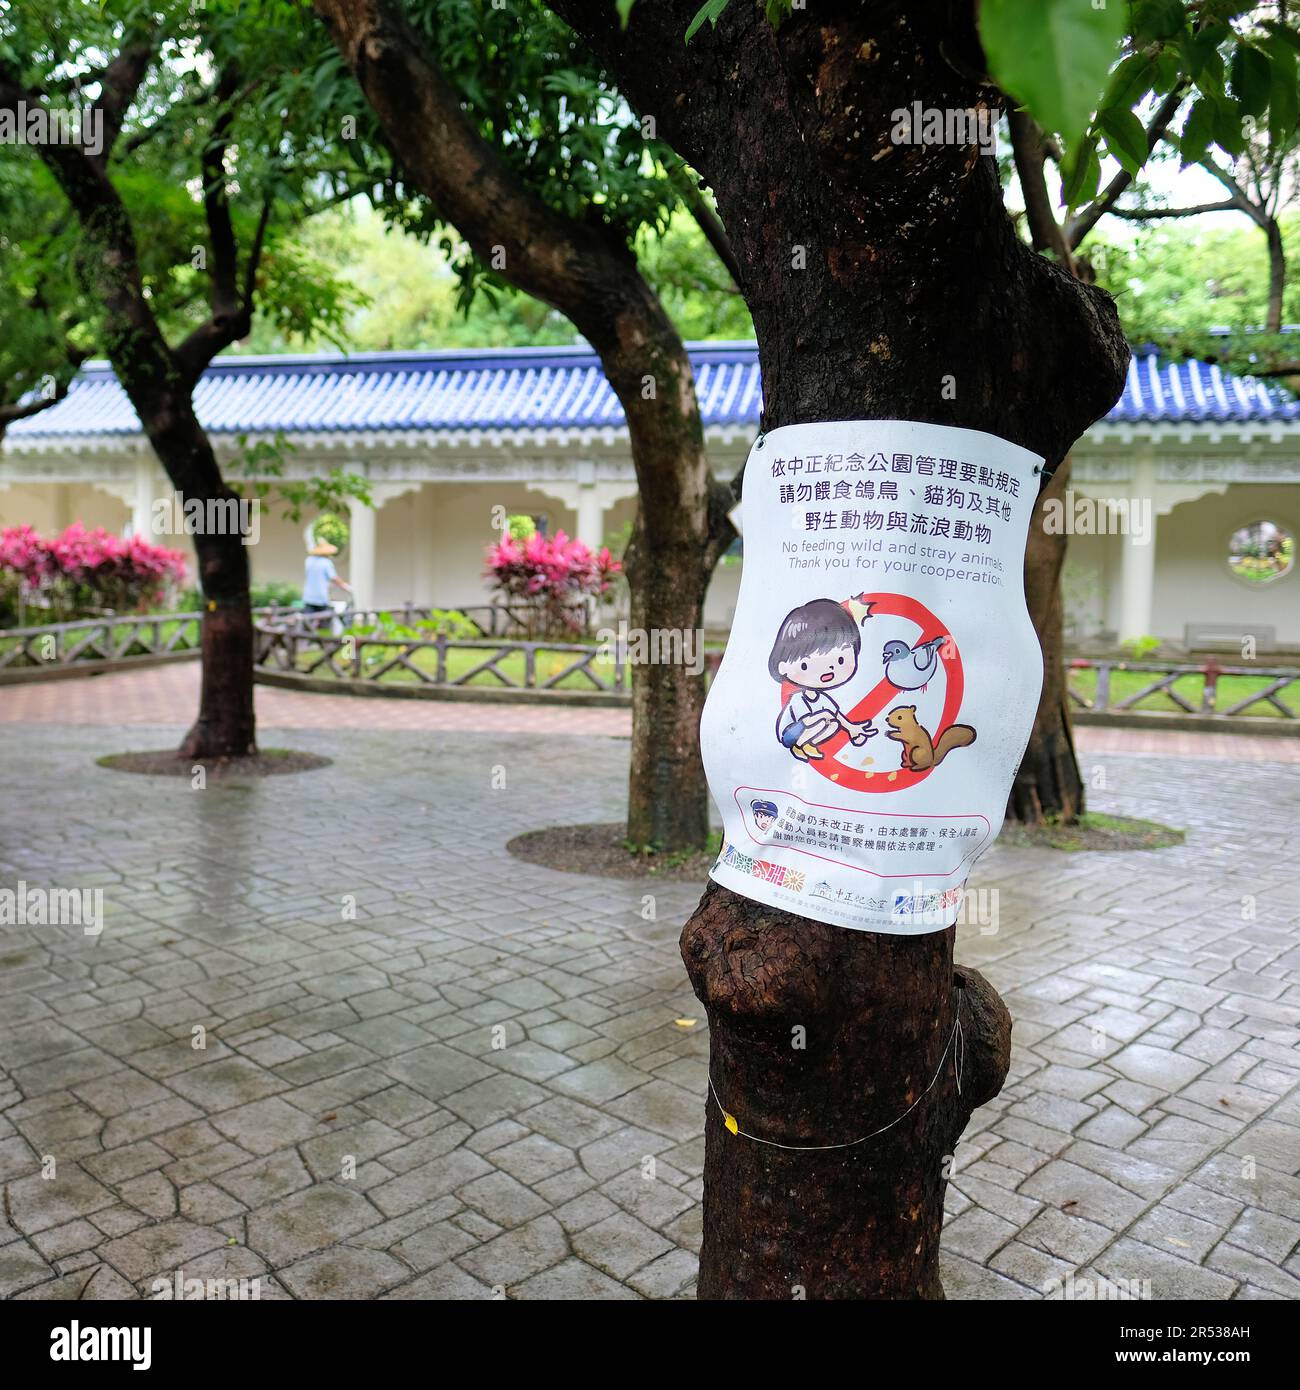 No Feeding Wild and Stray Animals sign at Chiang Kai-Shek Memorial Hall, Taipei, Taiwan; park rules and regulations asking for visitor cooperation. Stock Photo